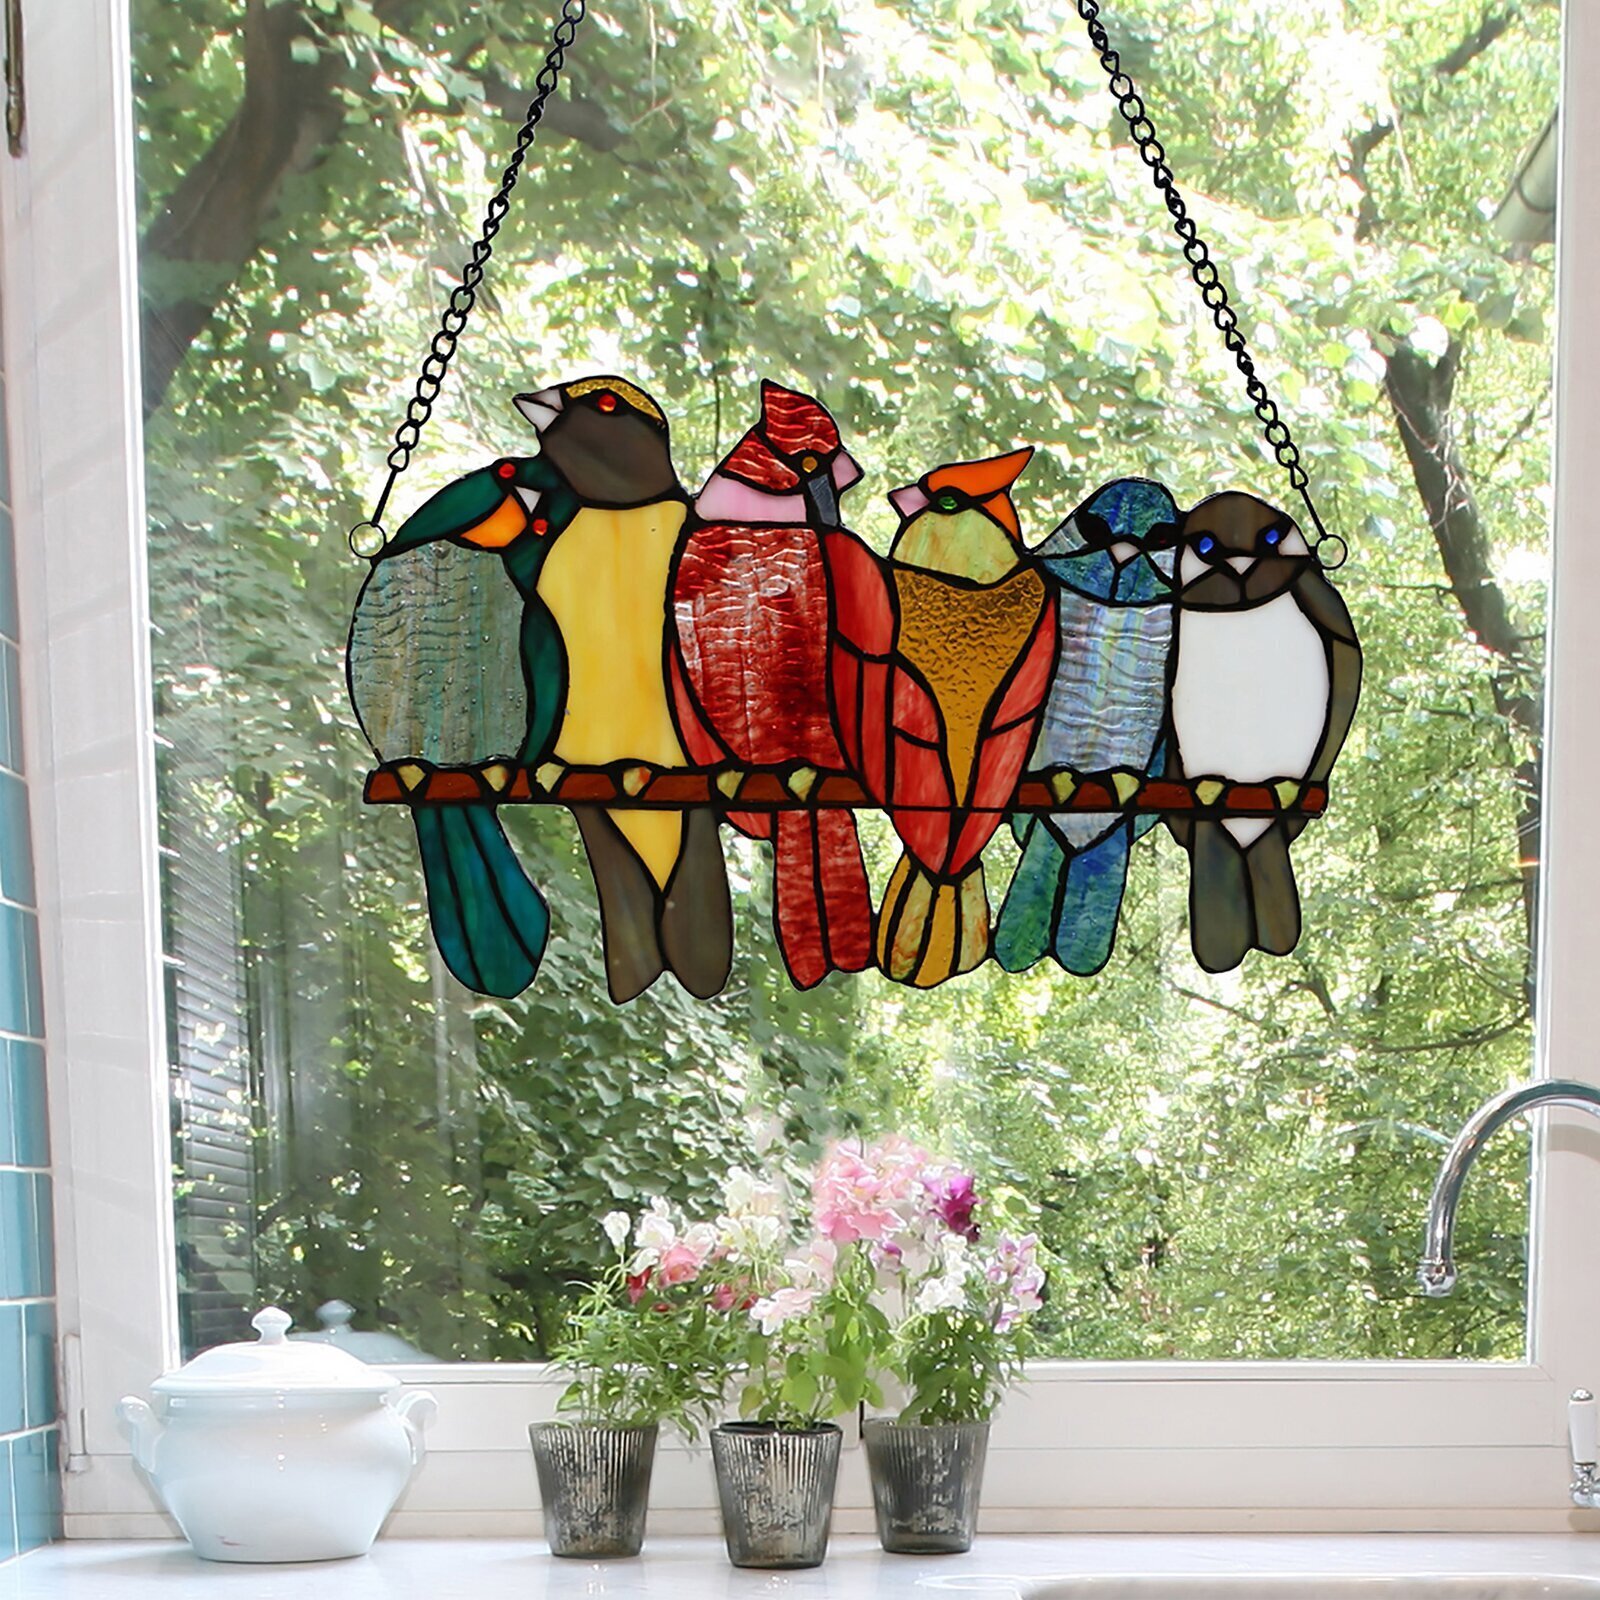 4 Bird Zoweys Multicolor Birds on a Wire High Stained Glass Suncatcher Window Hanging Ornaments Bird Series Sculptures Pendant Home Decoration for Patio Yard Decor Creative Gifts 